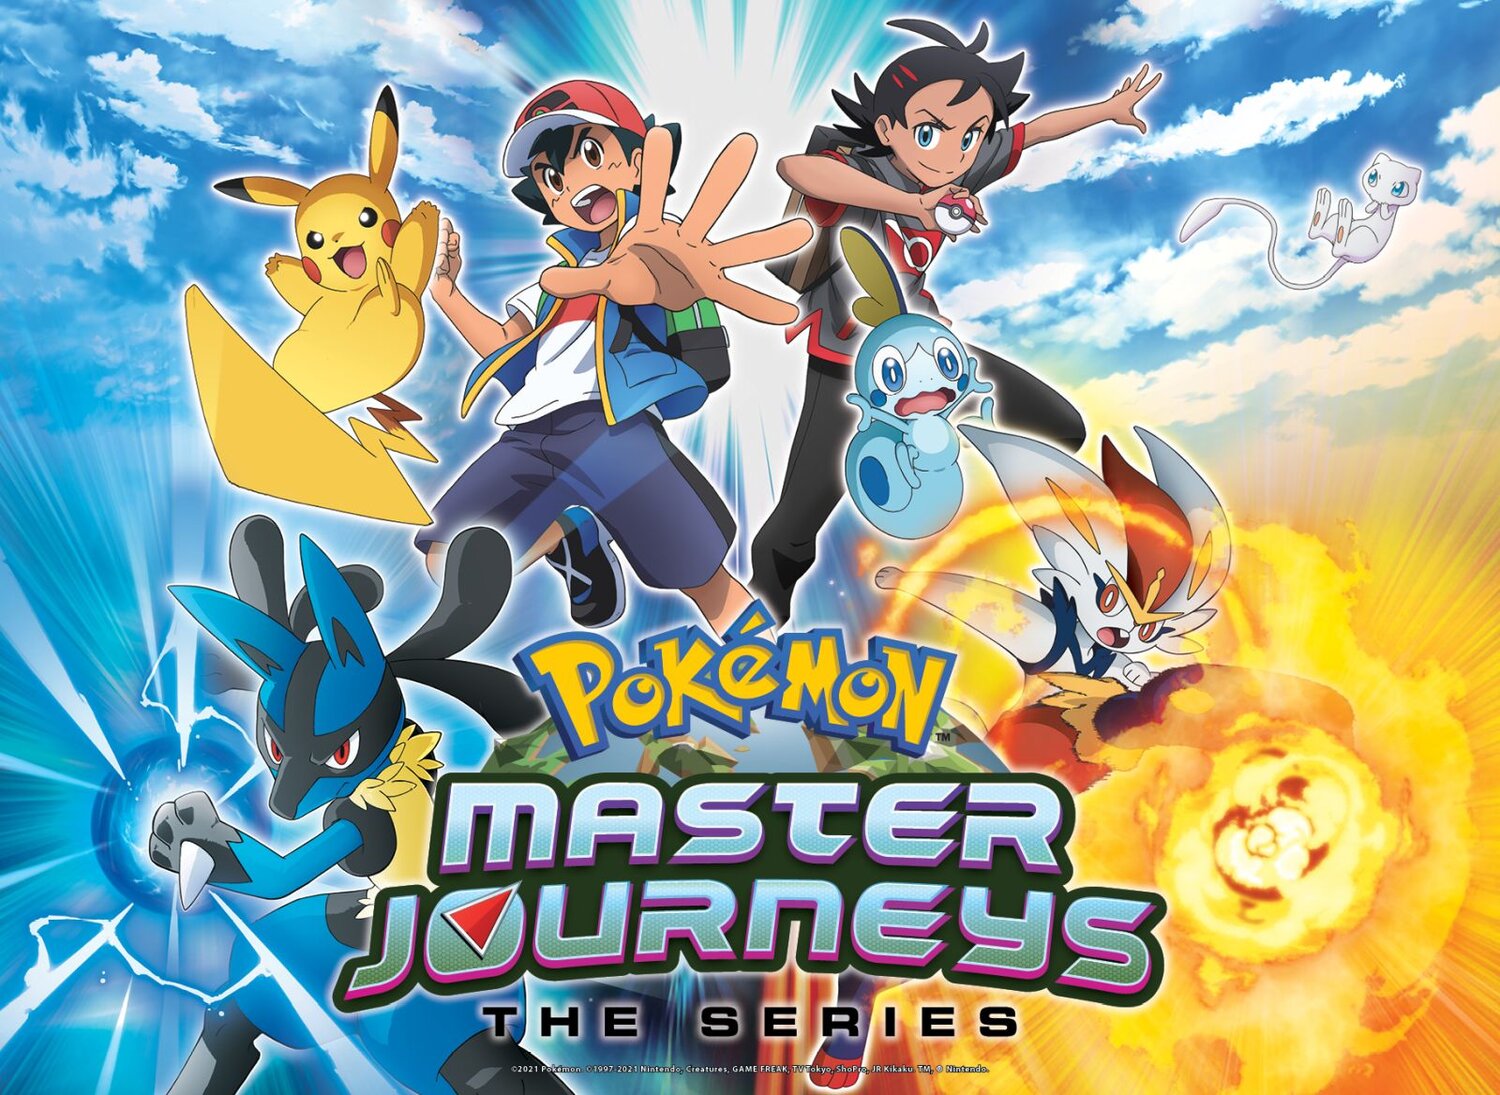 More Pokemon Adventures Coming This Year With POKEMON MASTER JOURNEY: THE SERIES